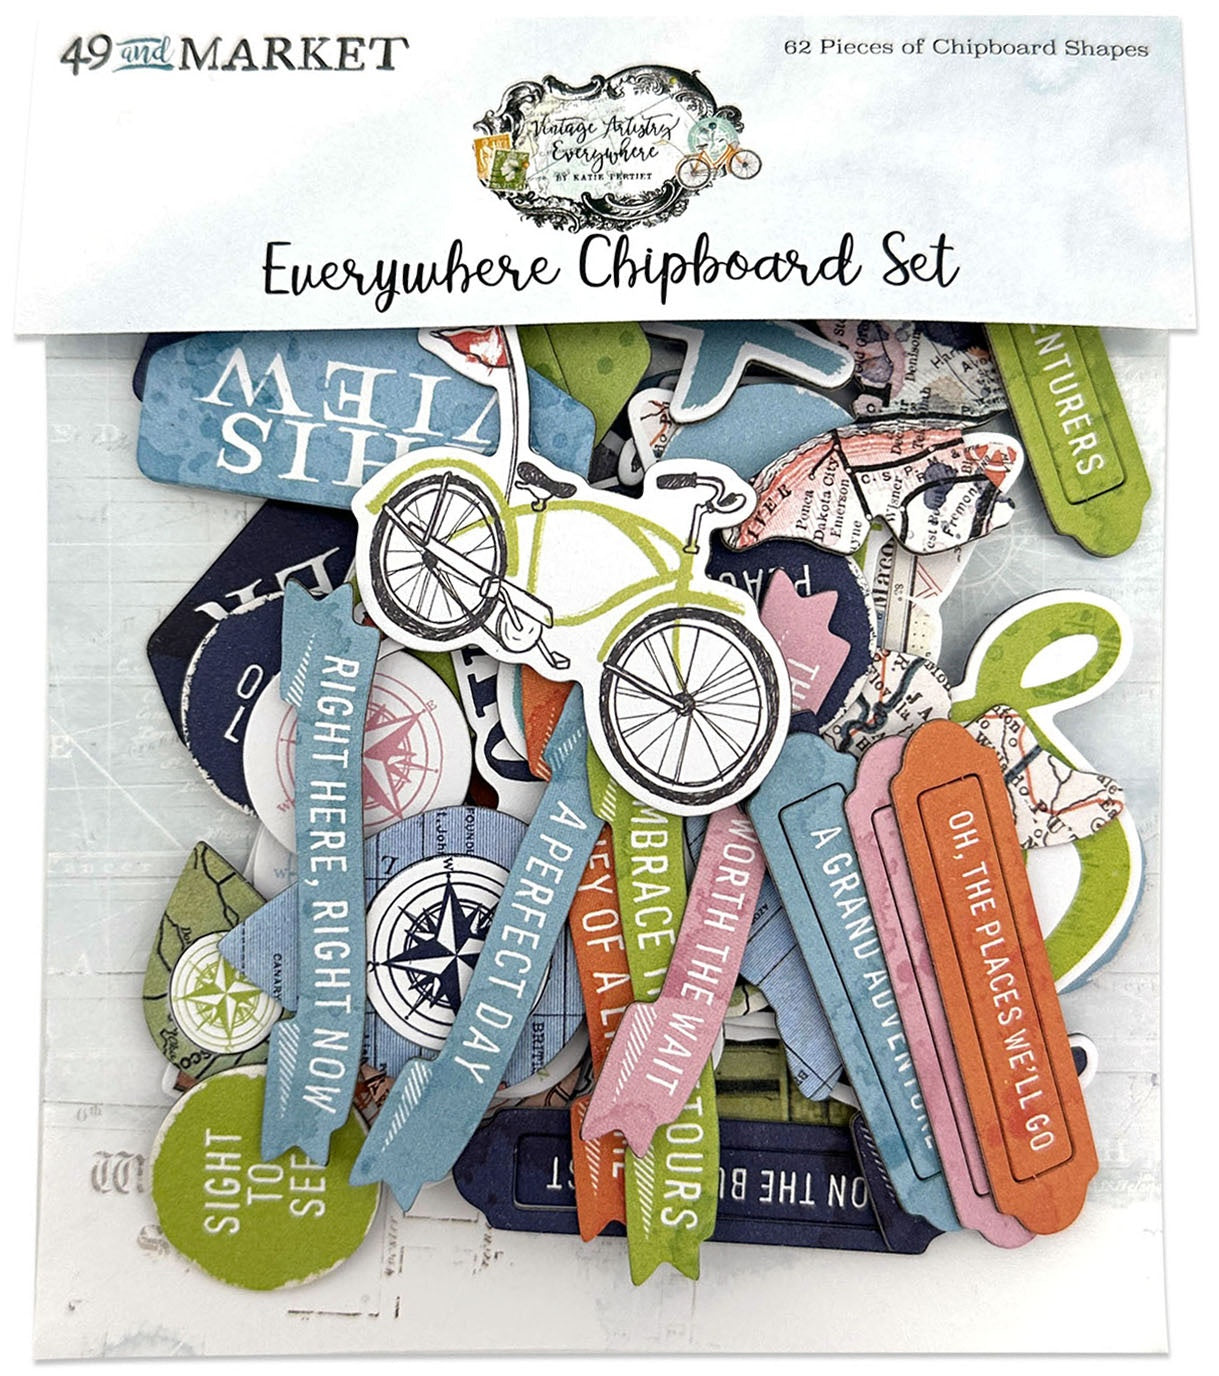 49 and Market chipboard set - Everywhere